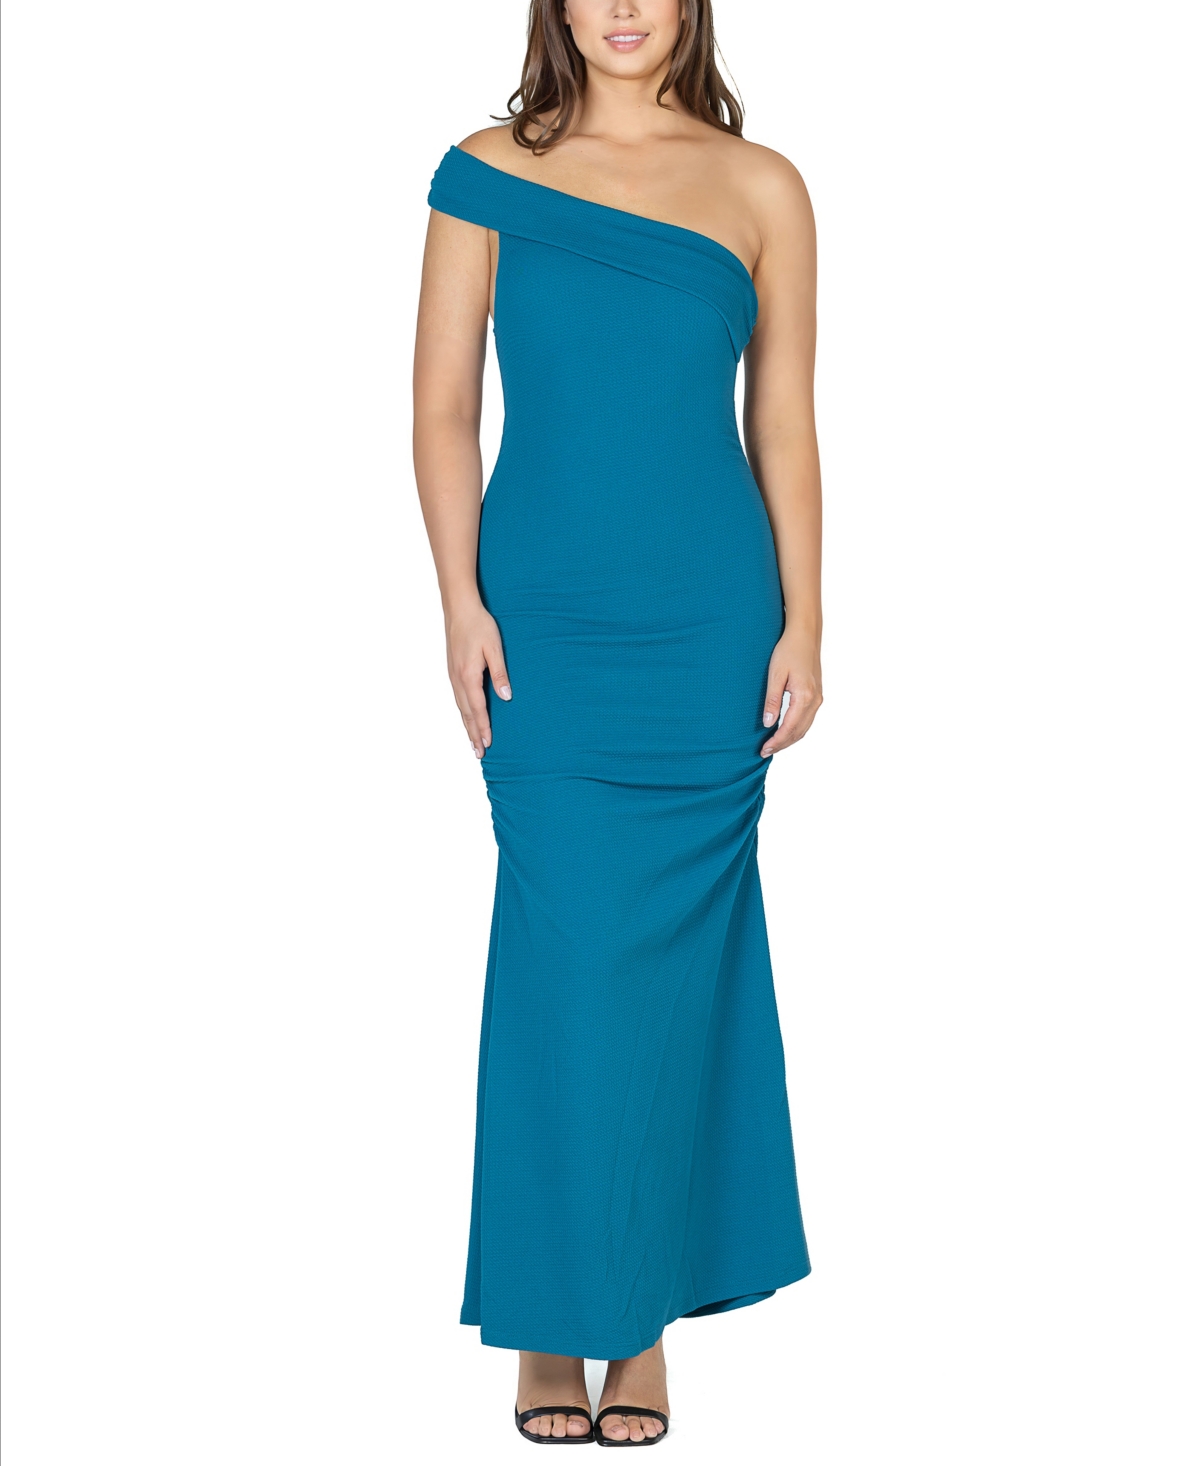 24seven Comfort Apparel Women's Party One Shoulder Rouched Maxi Dress In Teal